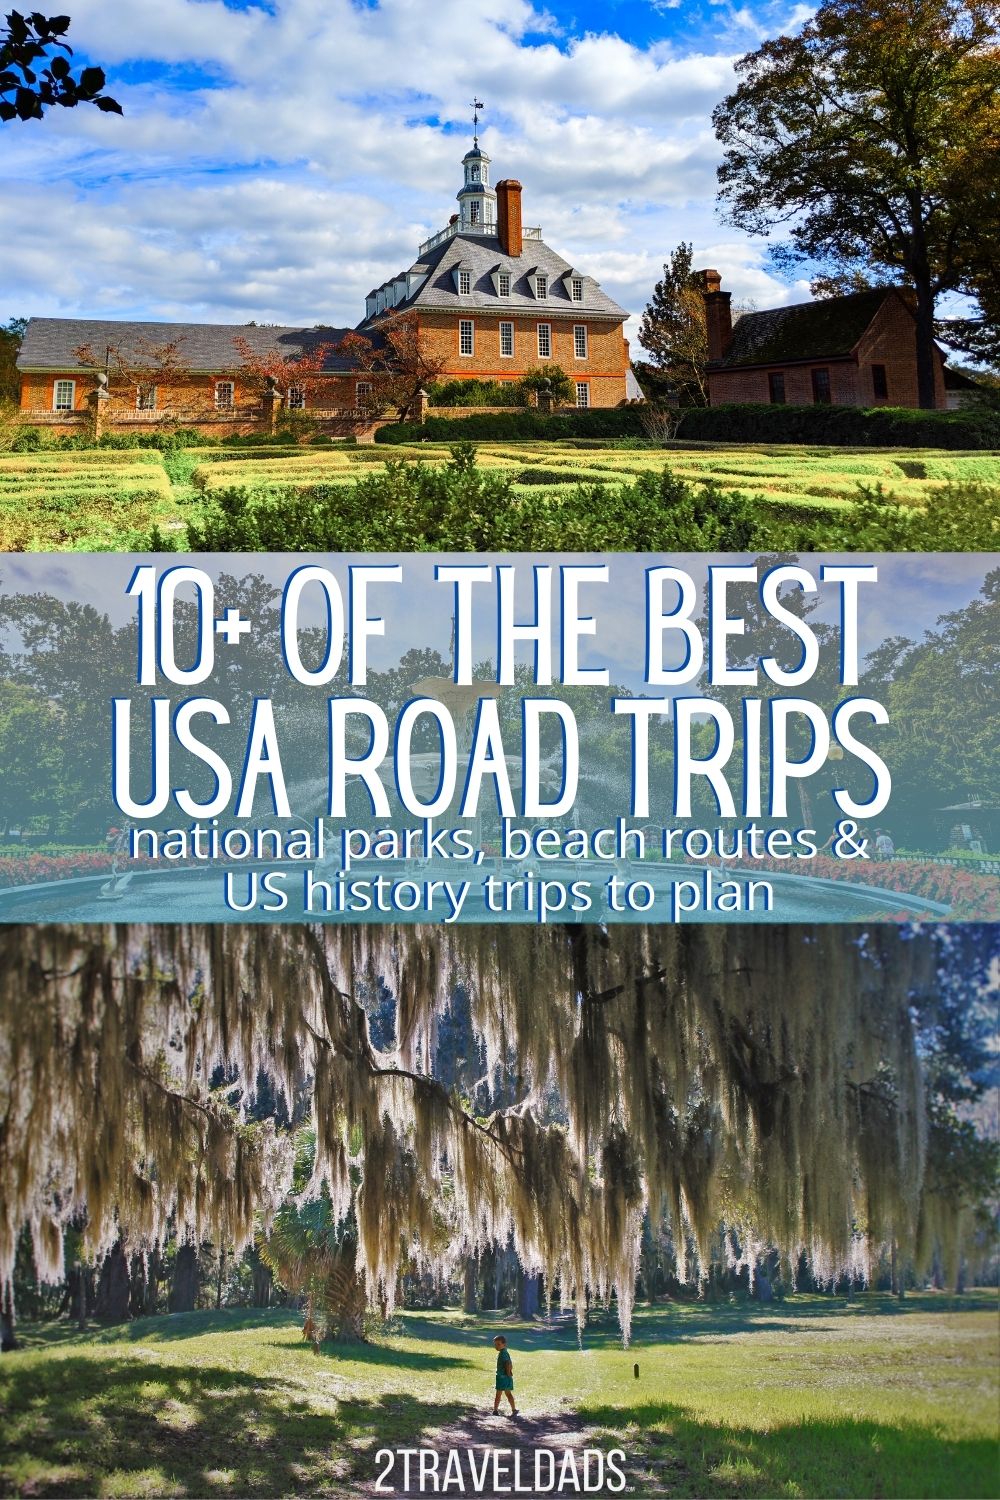 10 awesome USA road trips that you can plan now. From rugged Oregon to the Florida Keys, historic Virginia and Washington DC to western National Parks. Beautiful, fun USA road trips to look forward to.